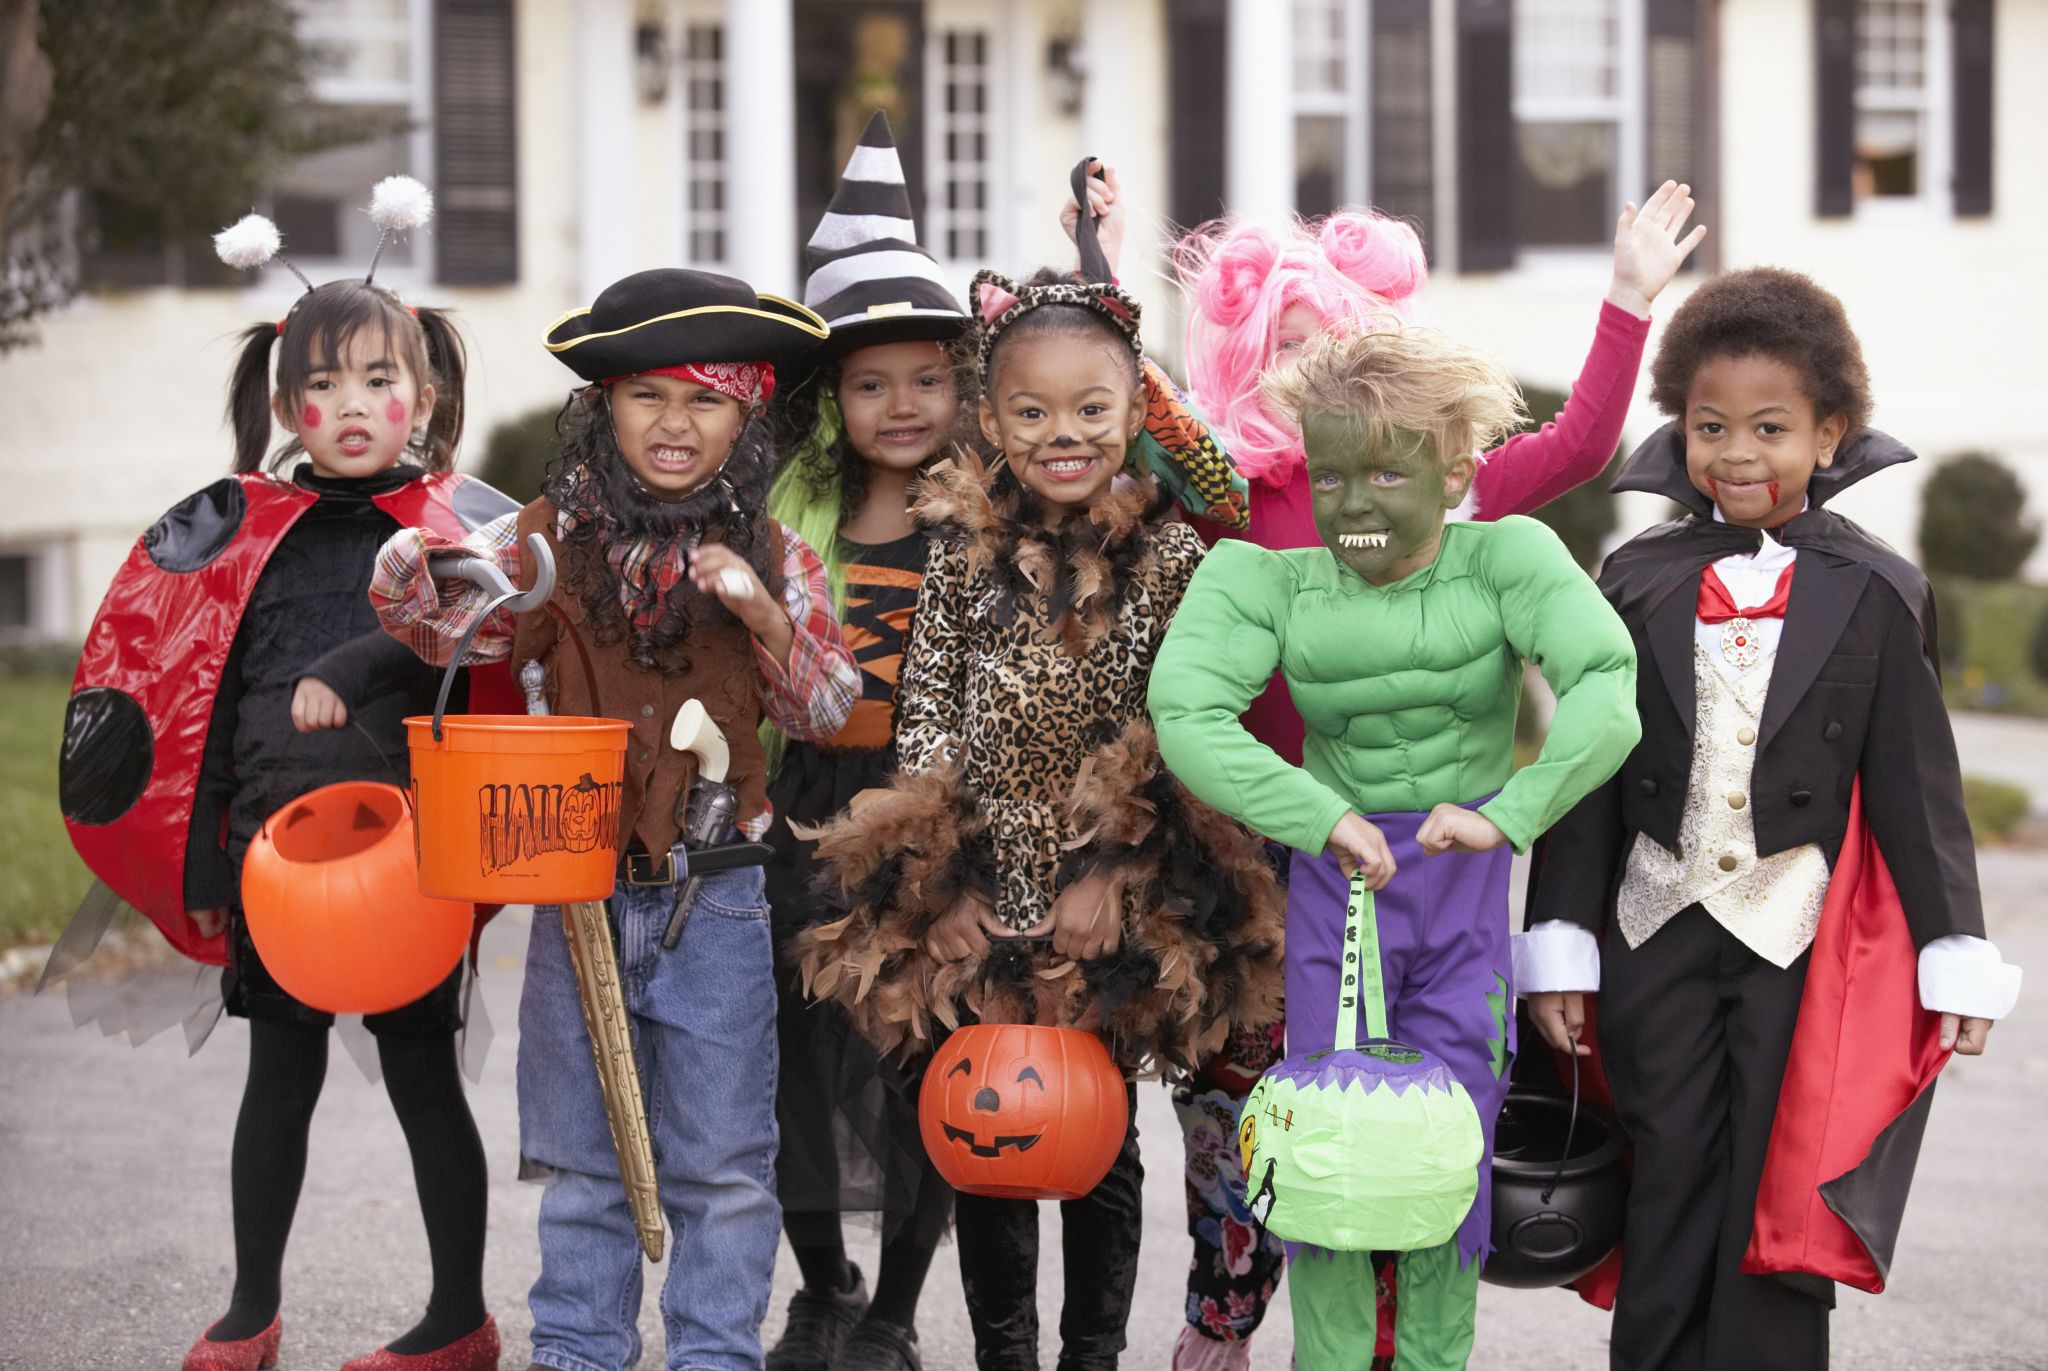 These elementary schools are banning students from wearing costumes on